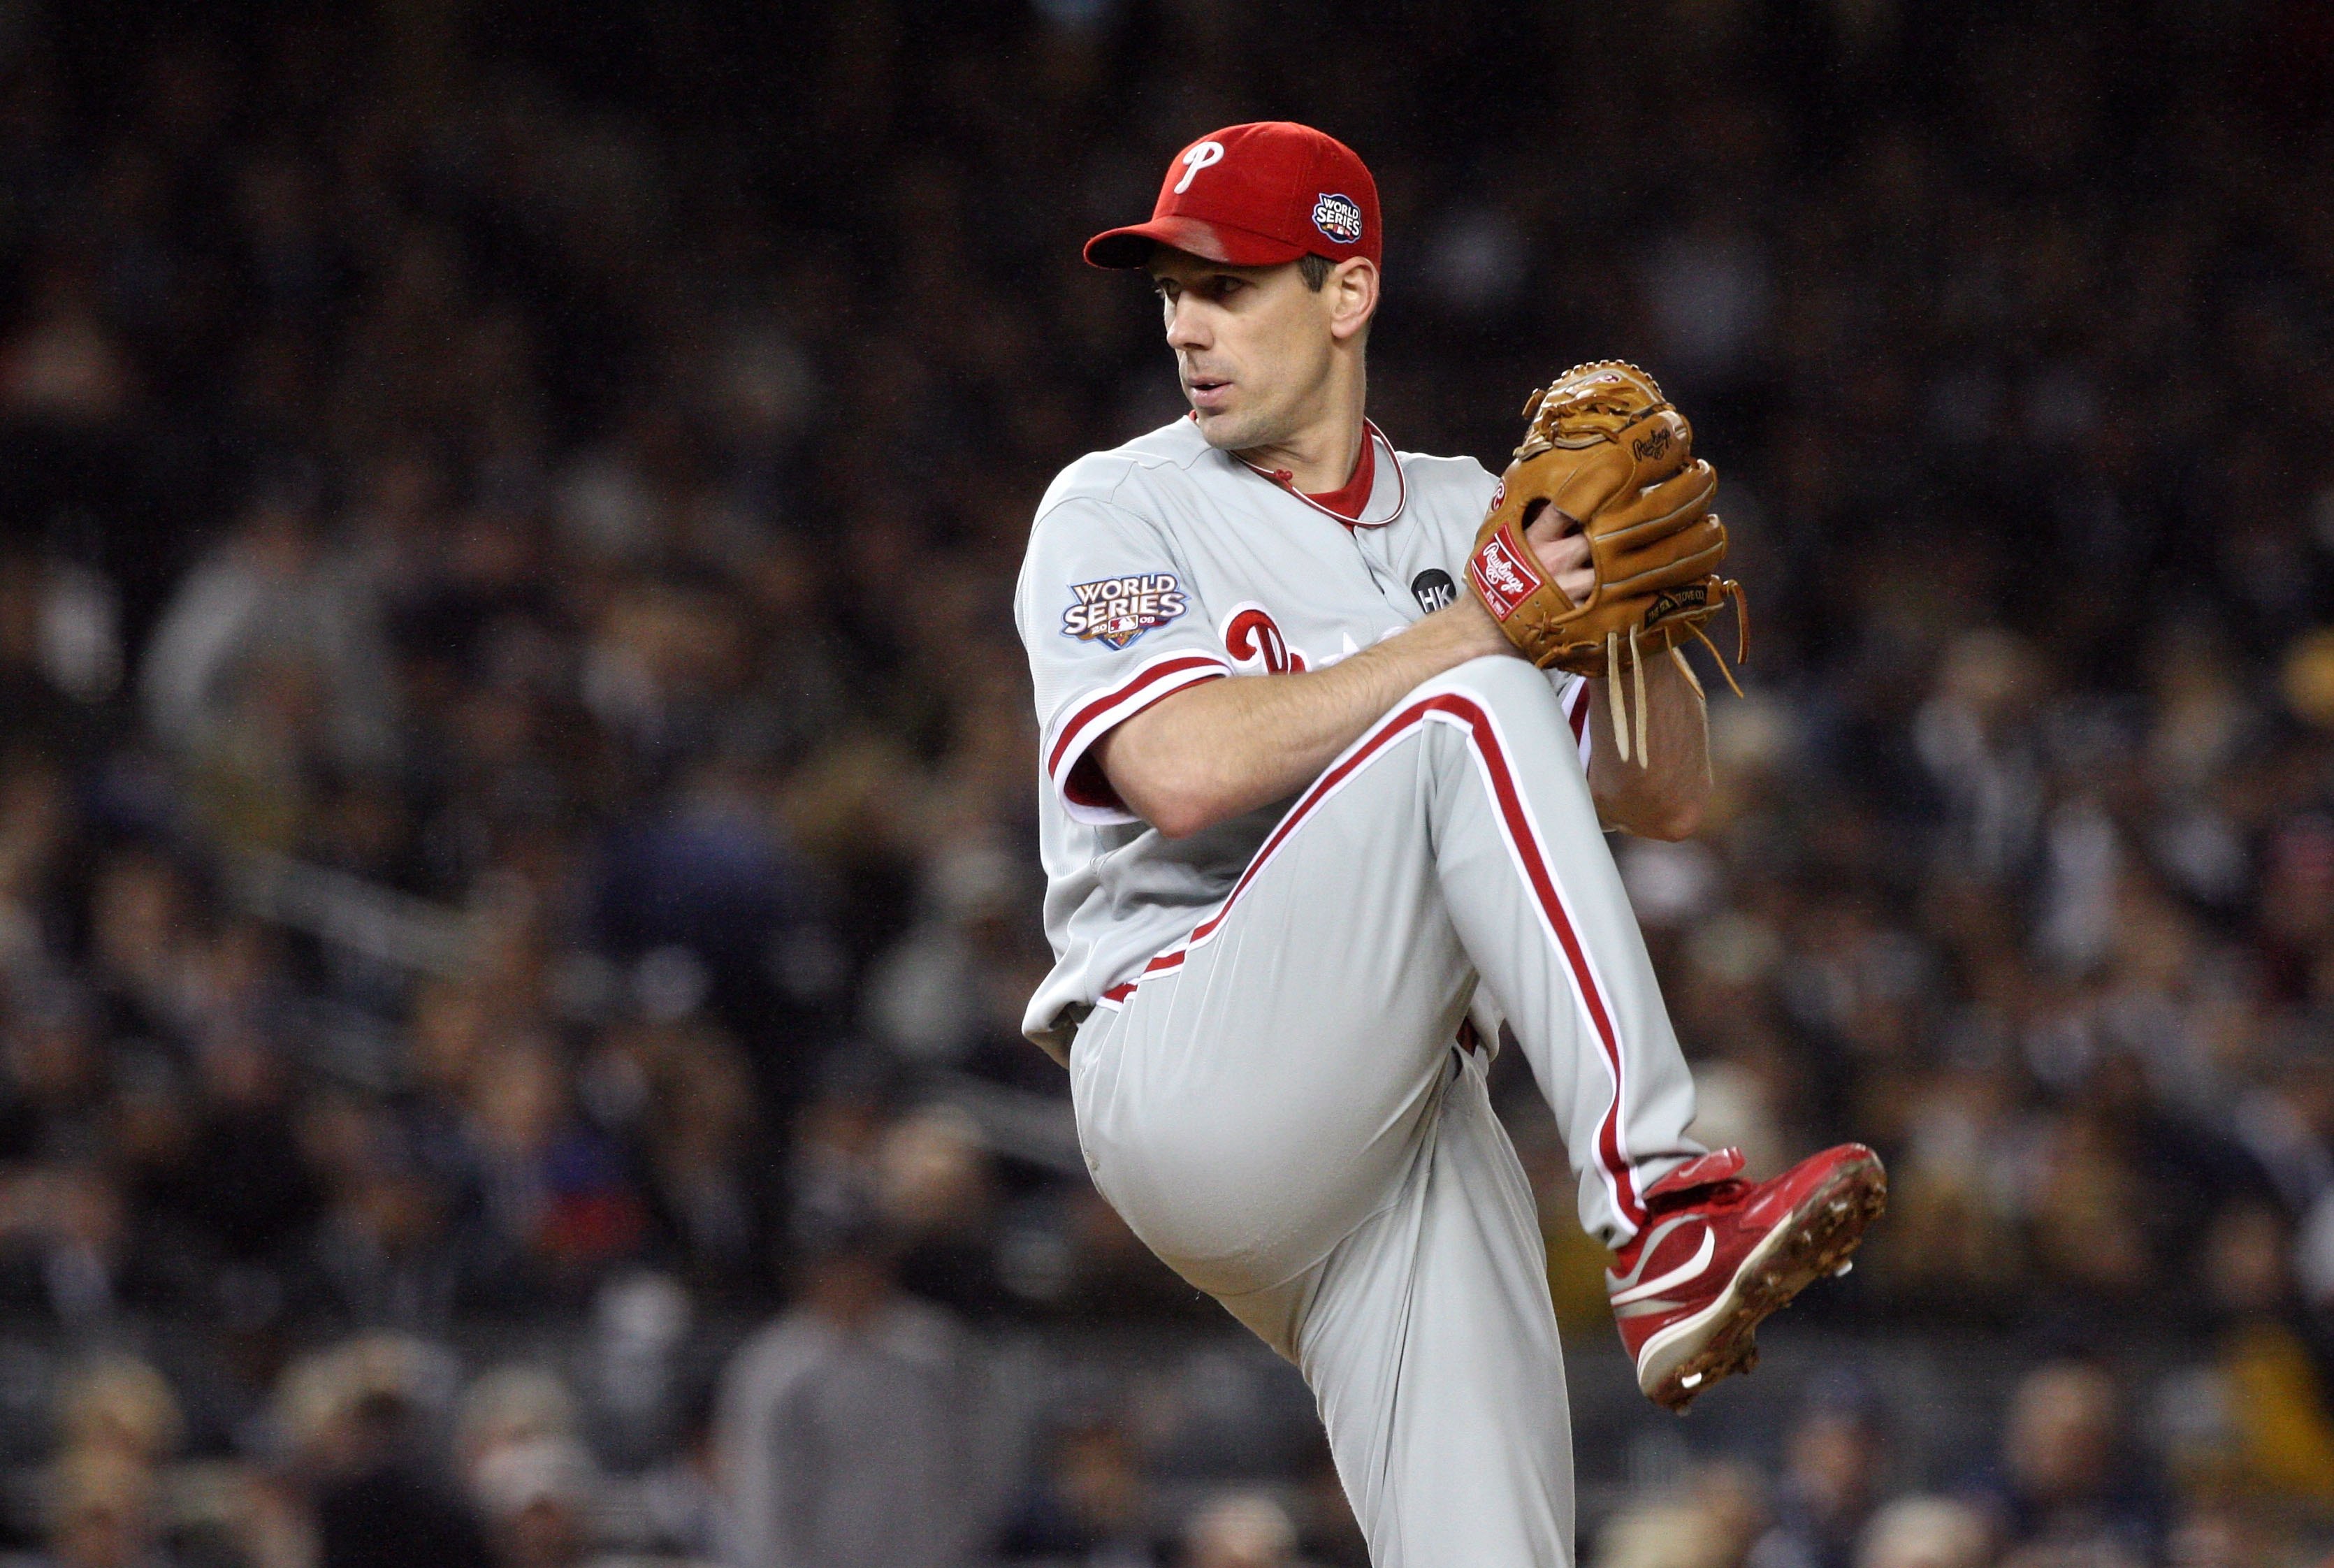 Phillies: Cliff Lee Tops Yanks in Game 1, 10 Years Ago Today